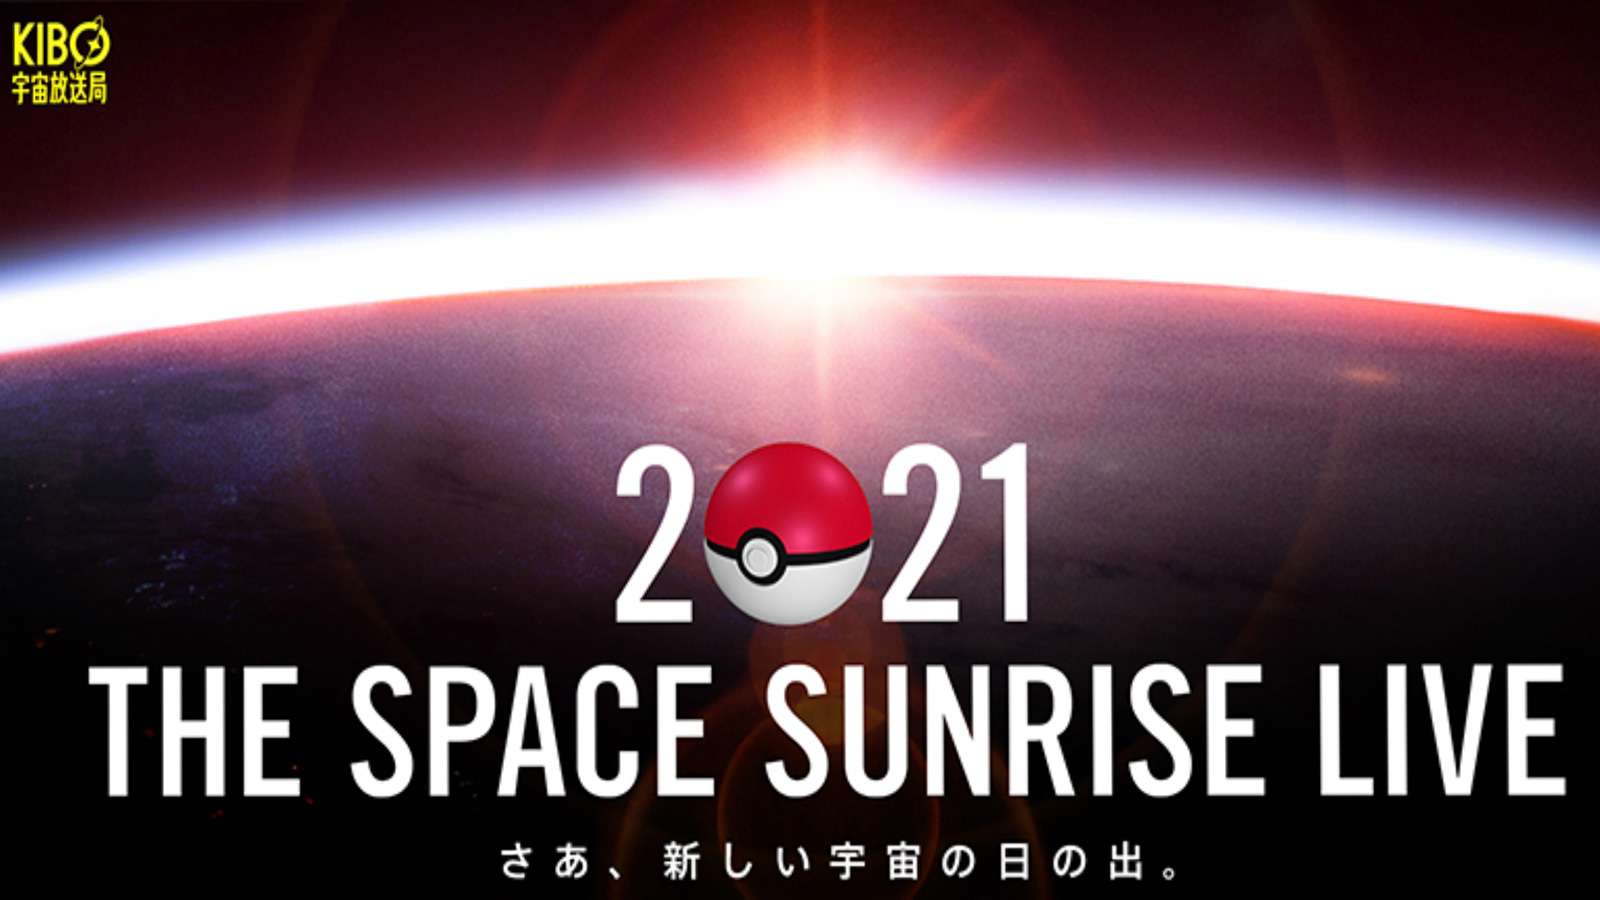 Promotion for Pokemon Space Sunrise New Years Eve live event.